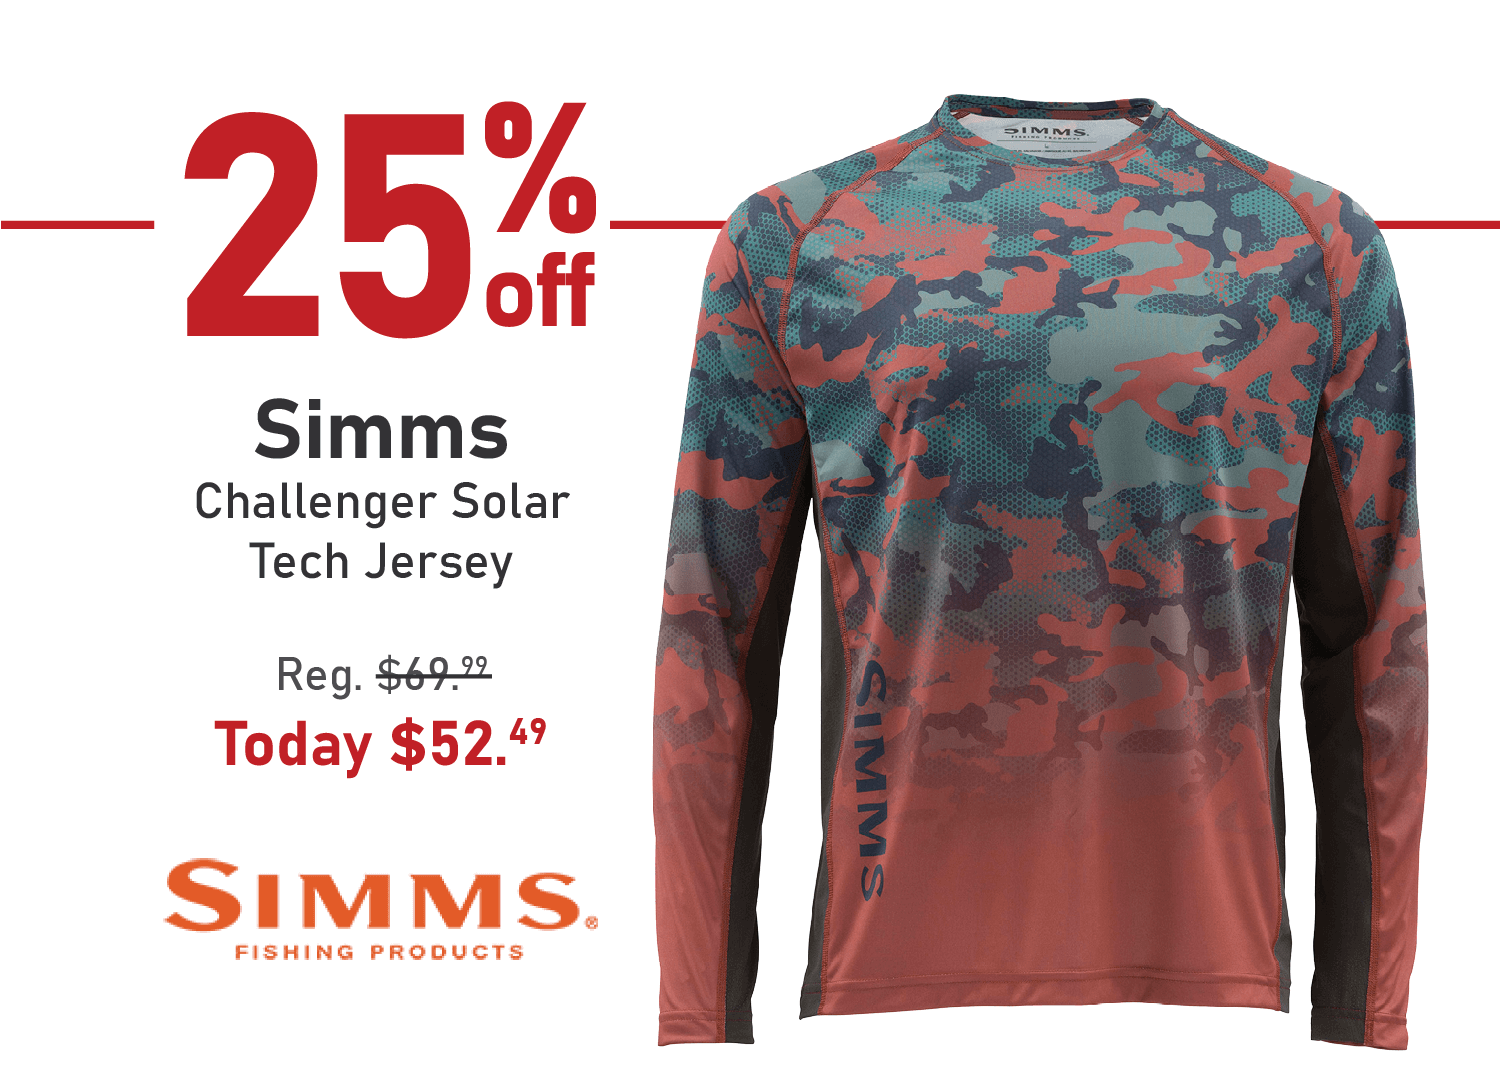 Save 25% on the Simms Challenger Solar Tech Jersey